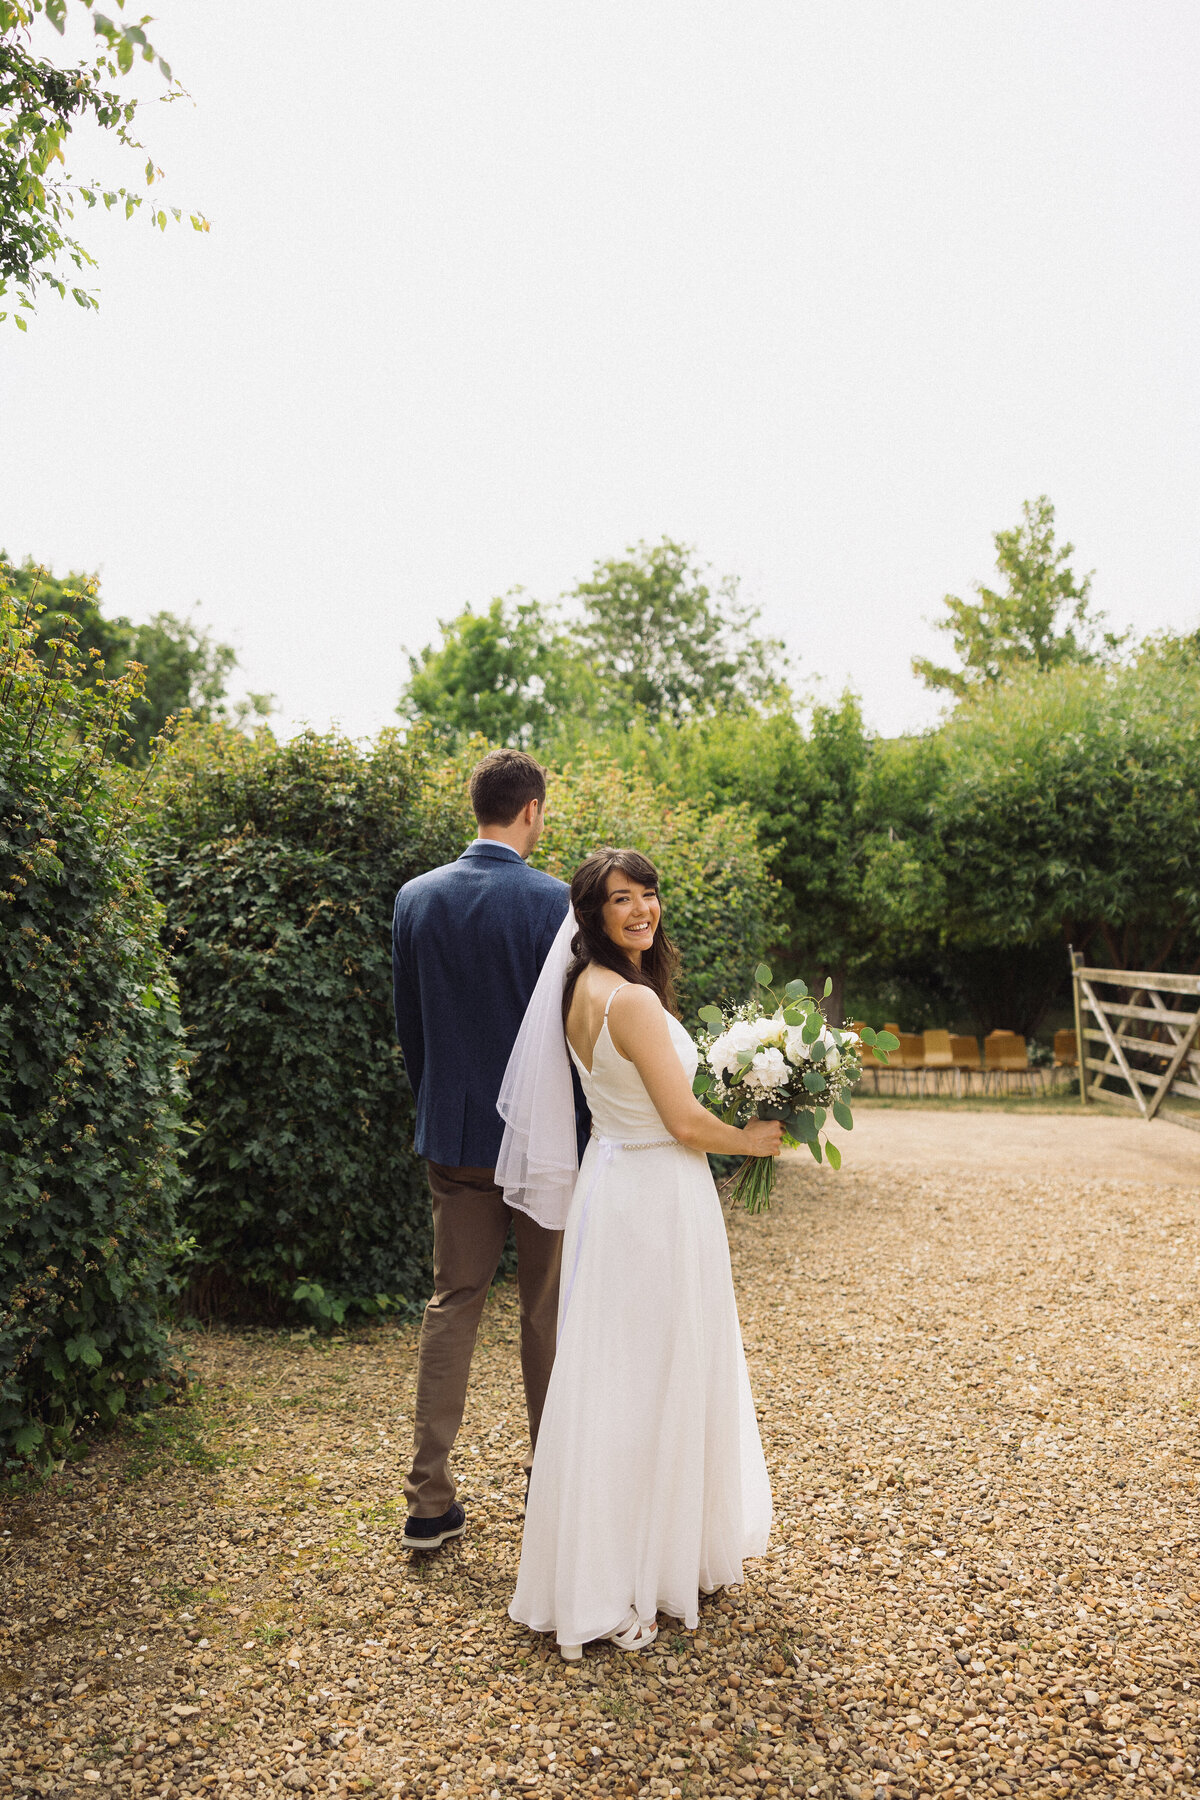 Amy Cutliffe Photography (108)